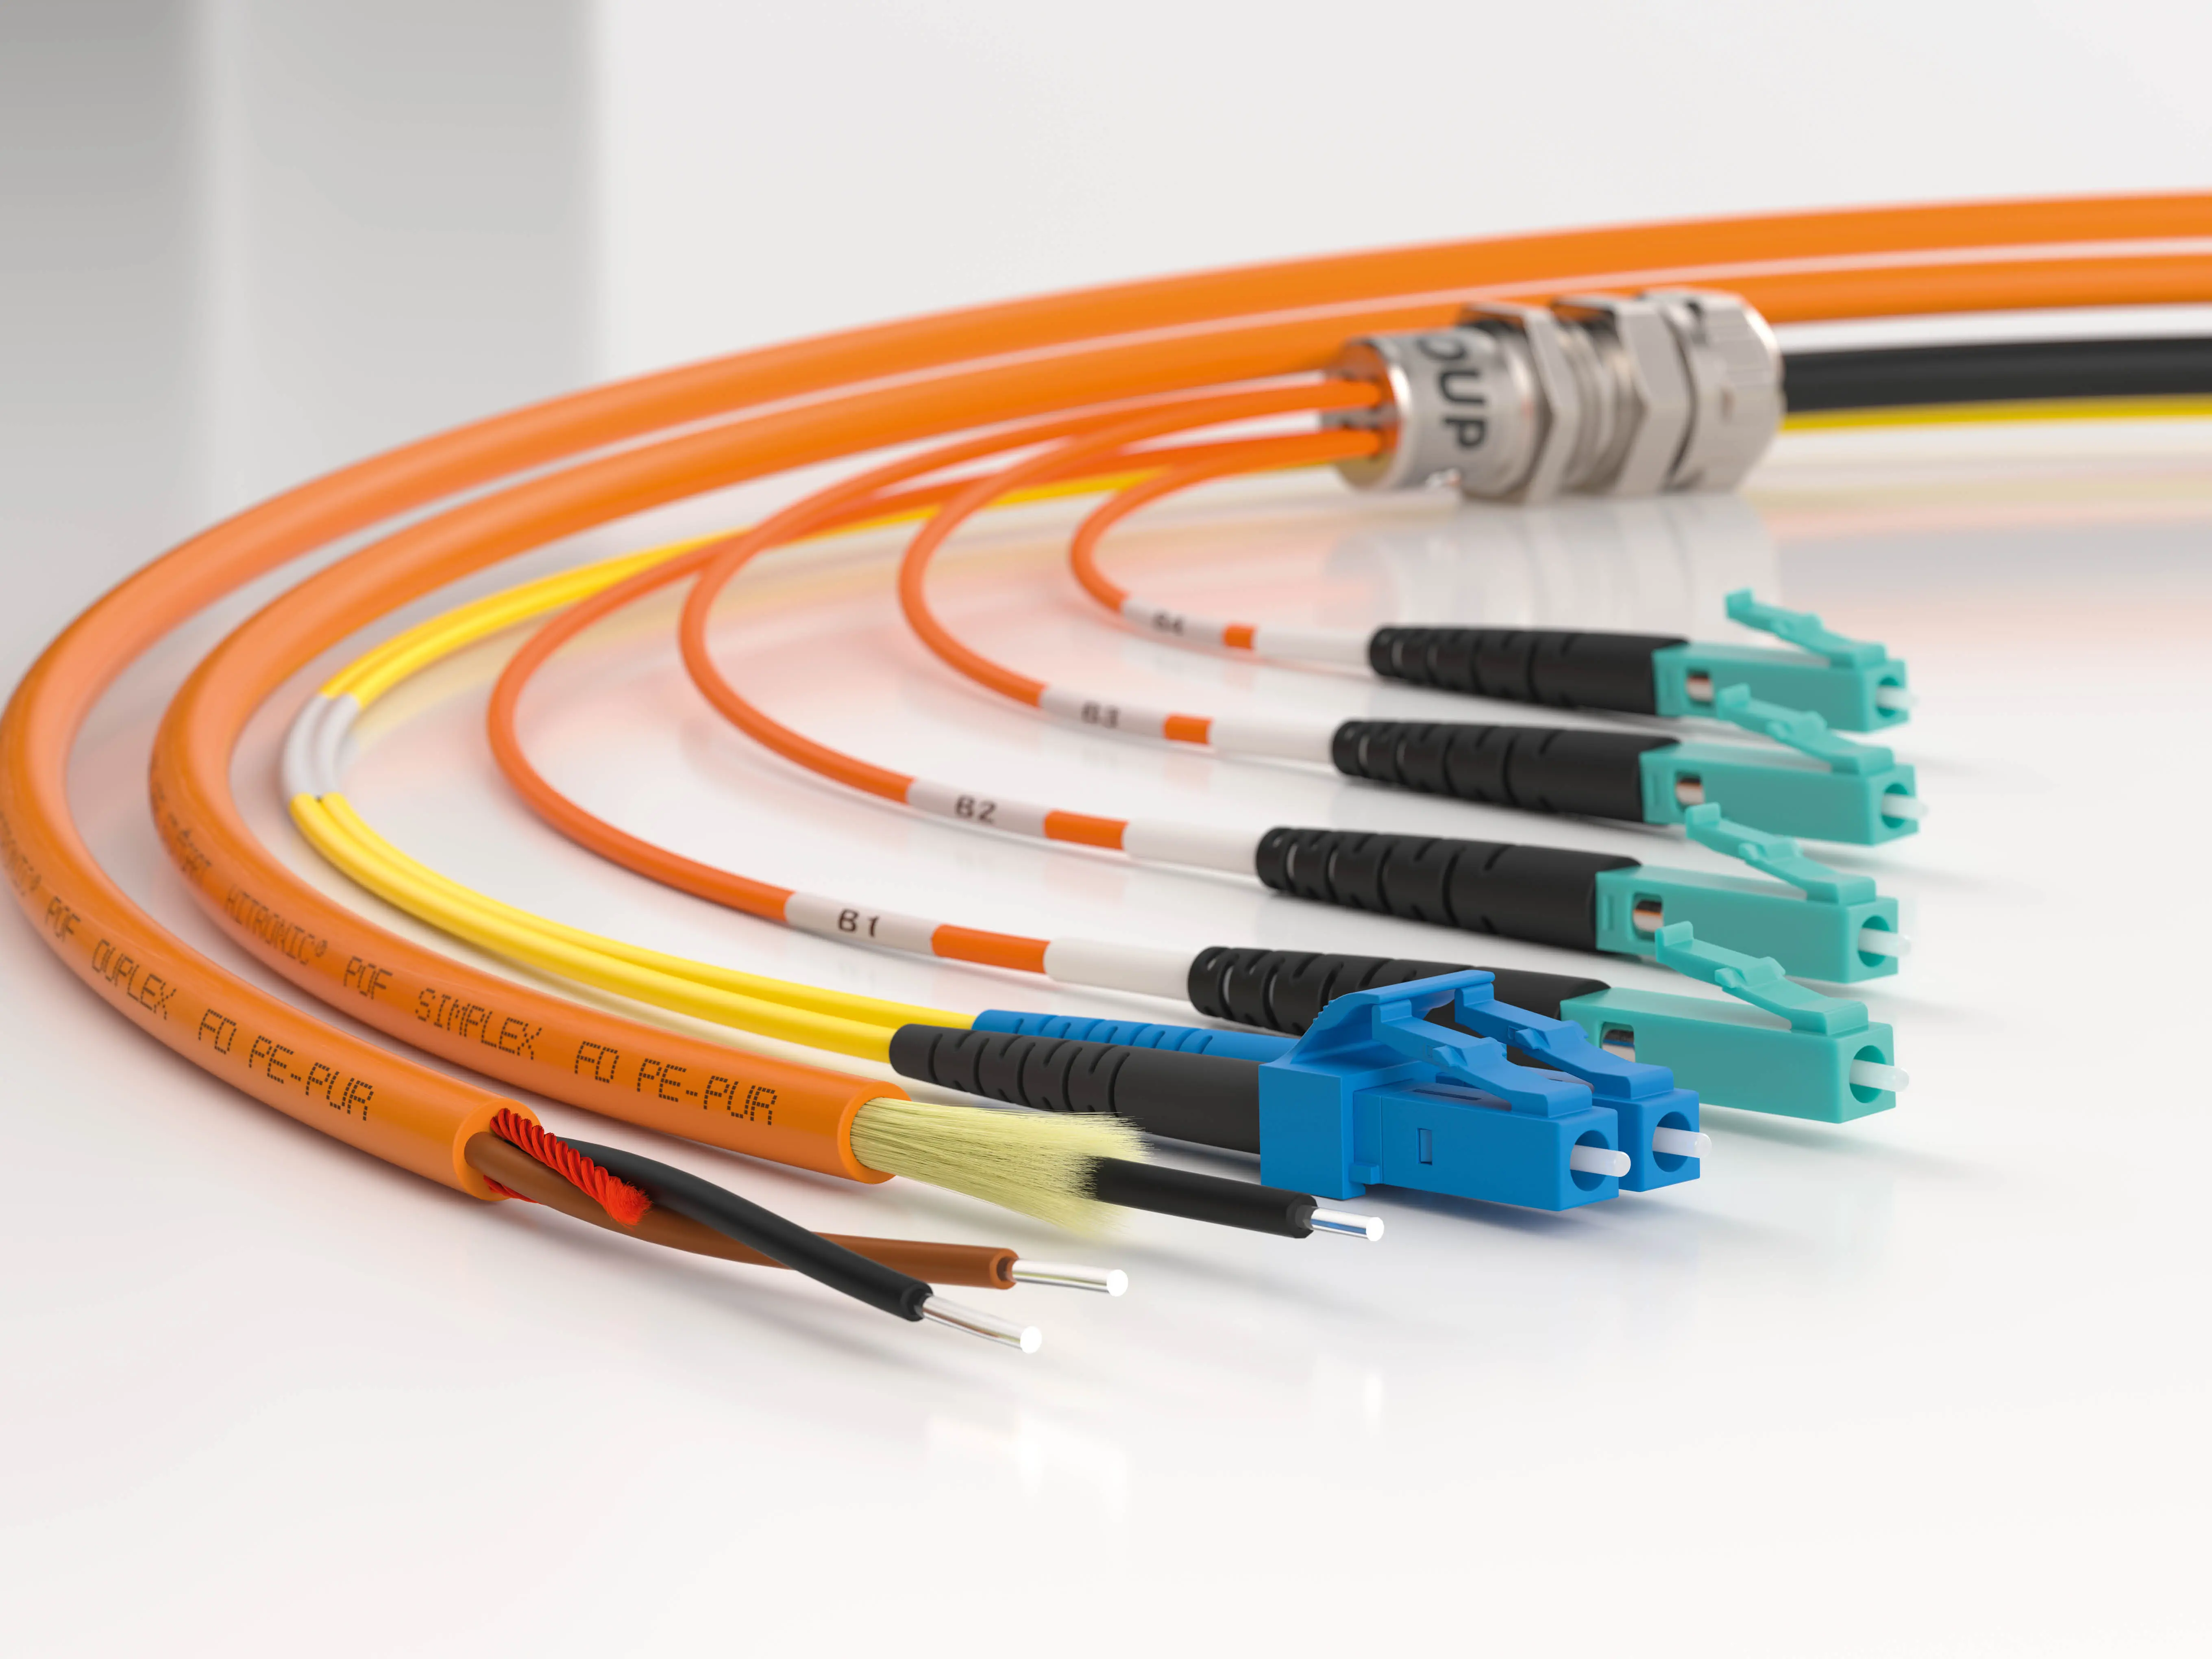 HITRONIC® fibre optic cables from LAPP